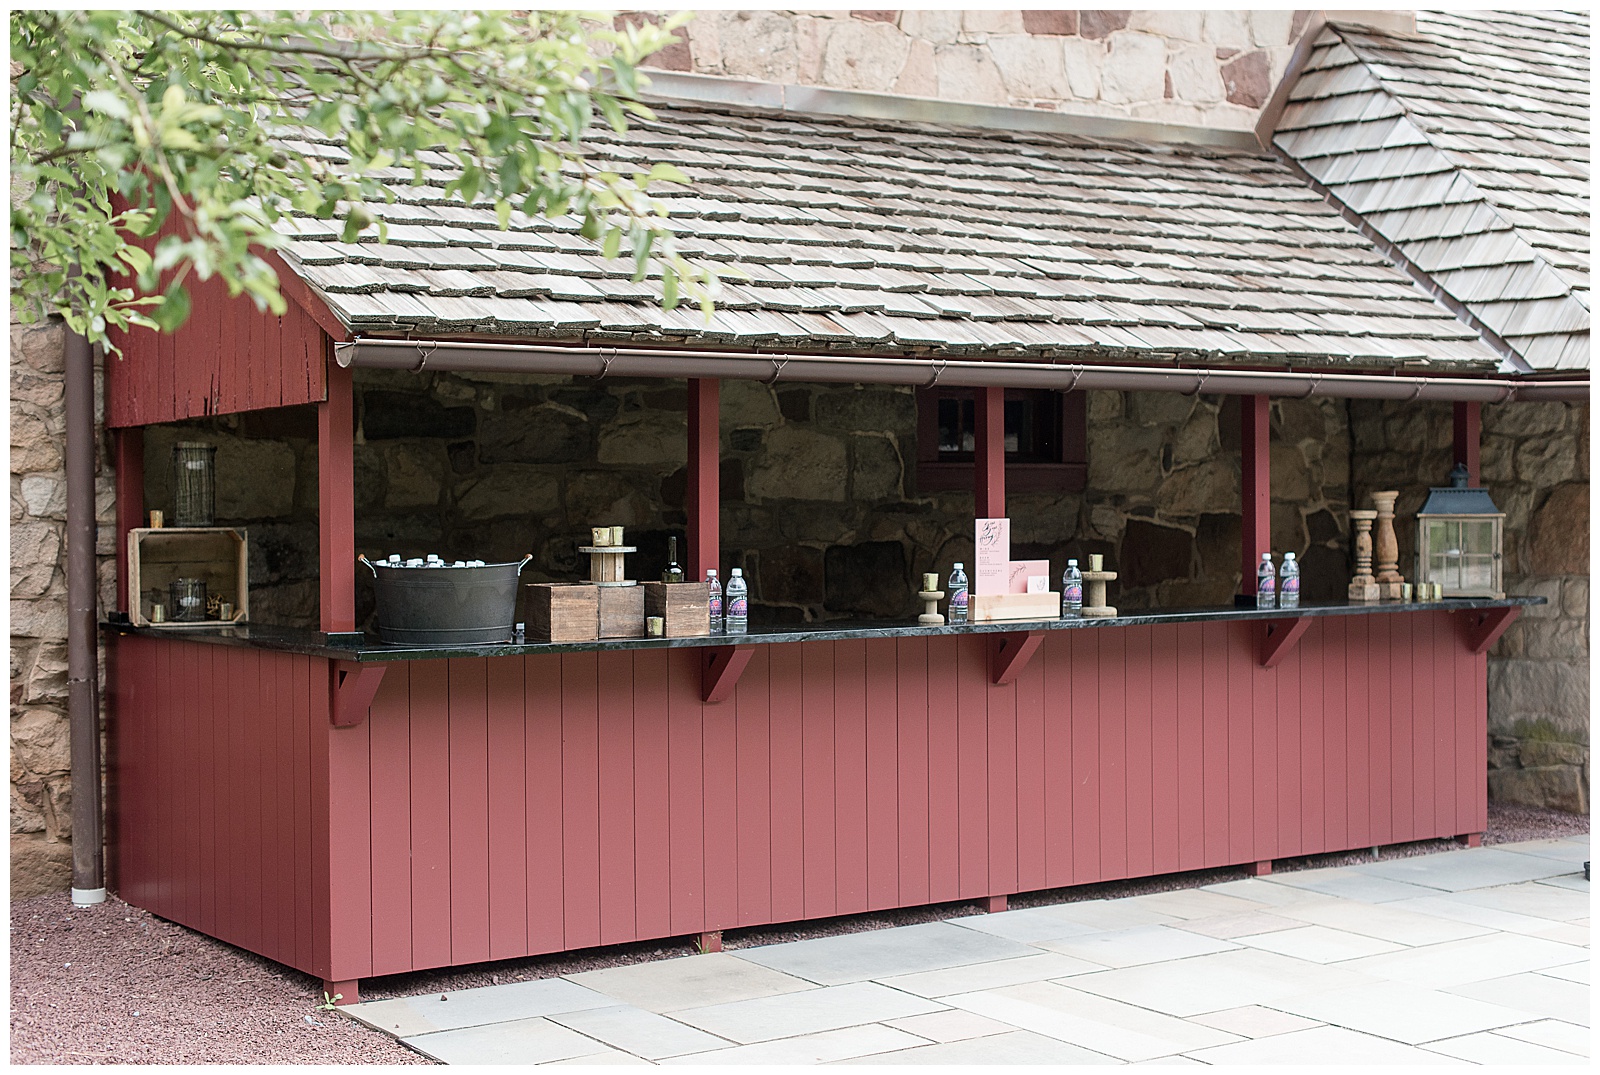 rustic maroon shed with cedar shingles converted into walk-up bar for guests to use at weddings at elizabeth furnace in lititz pennsylvania